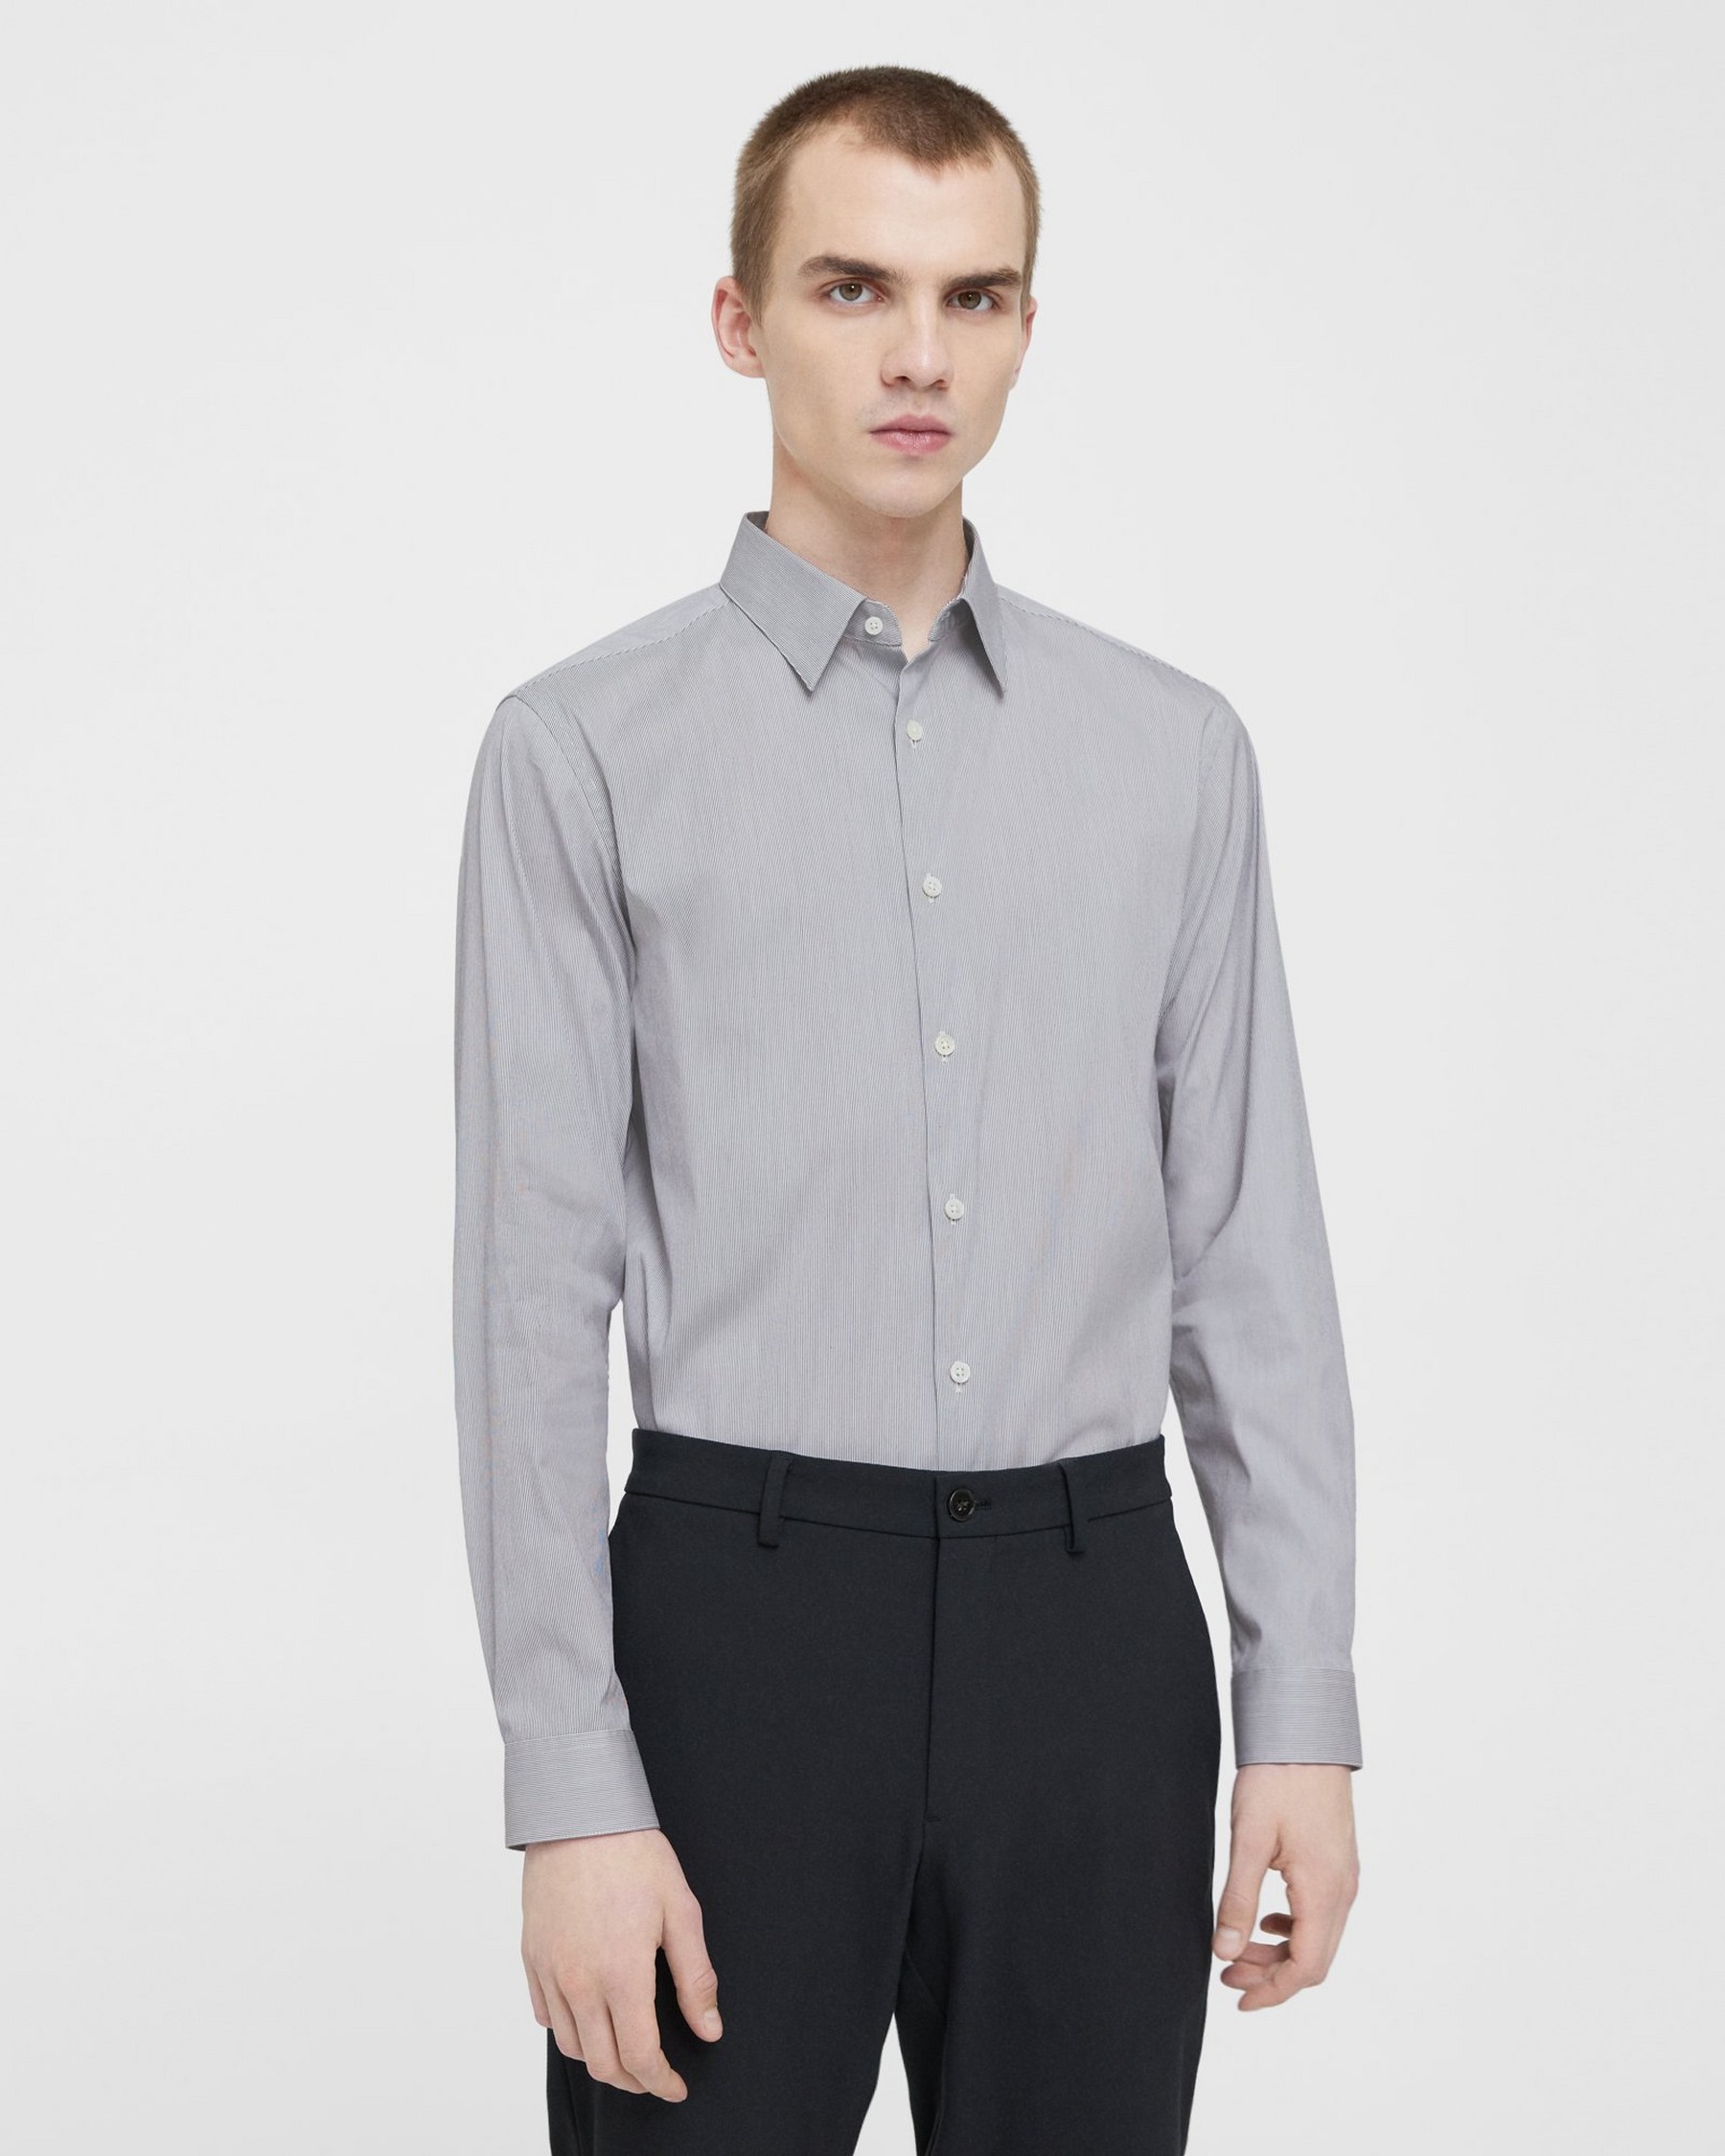 Theory Irving Shirt in Striped Cotton Blend